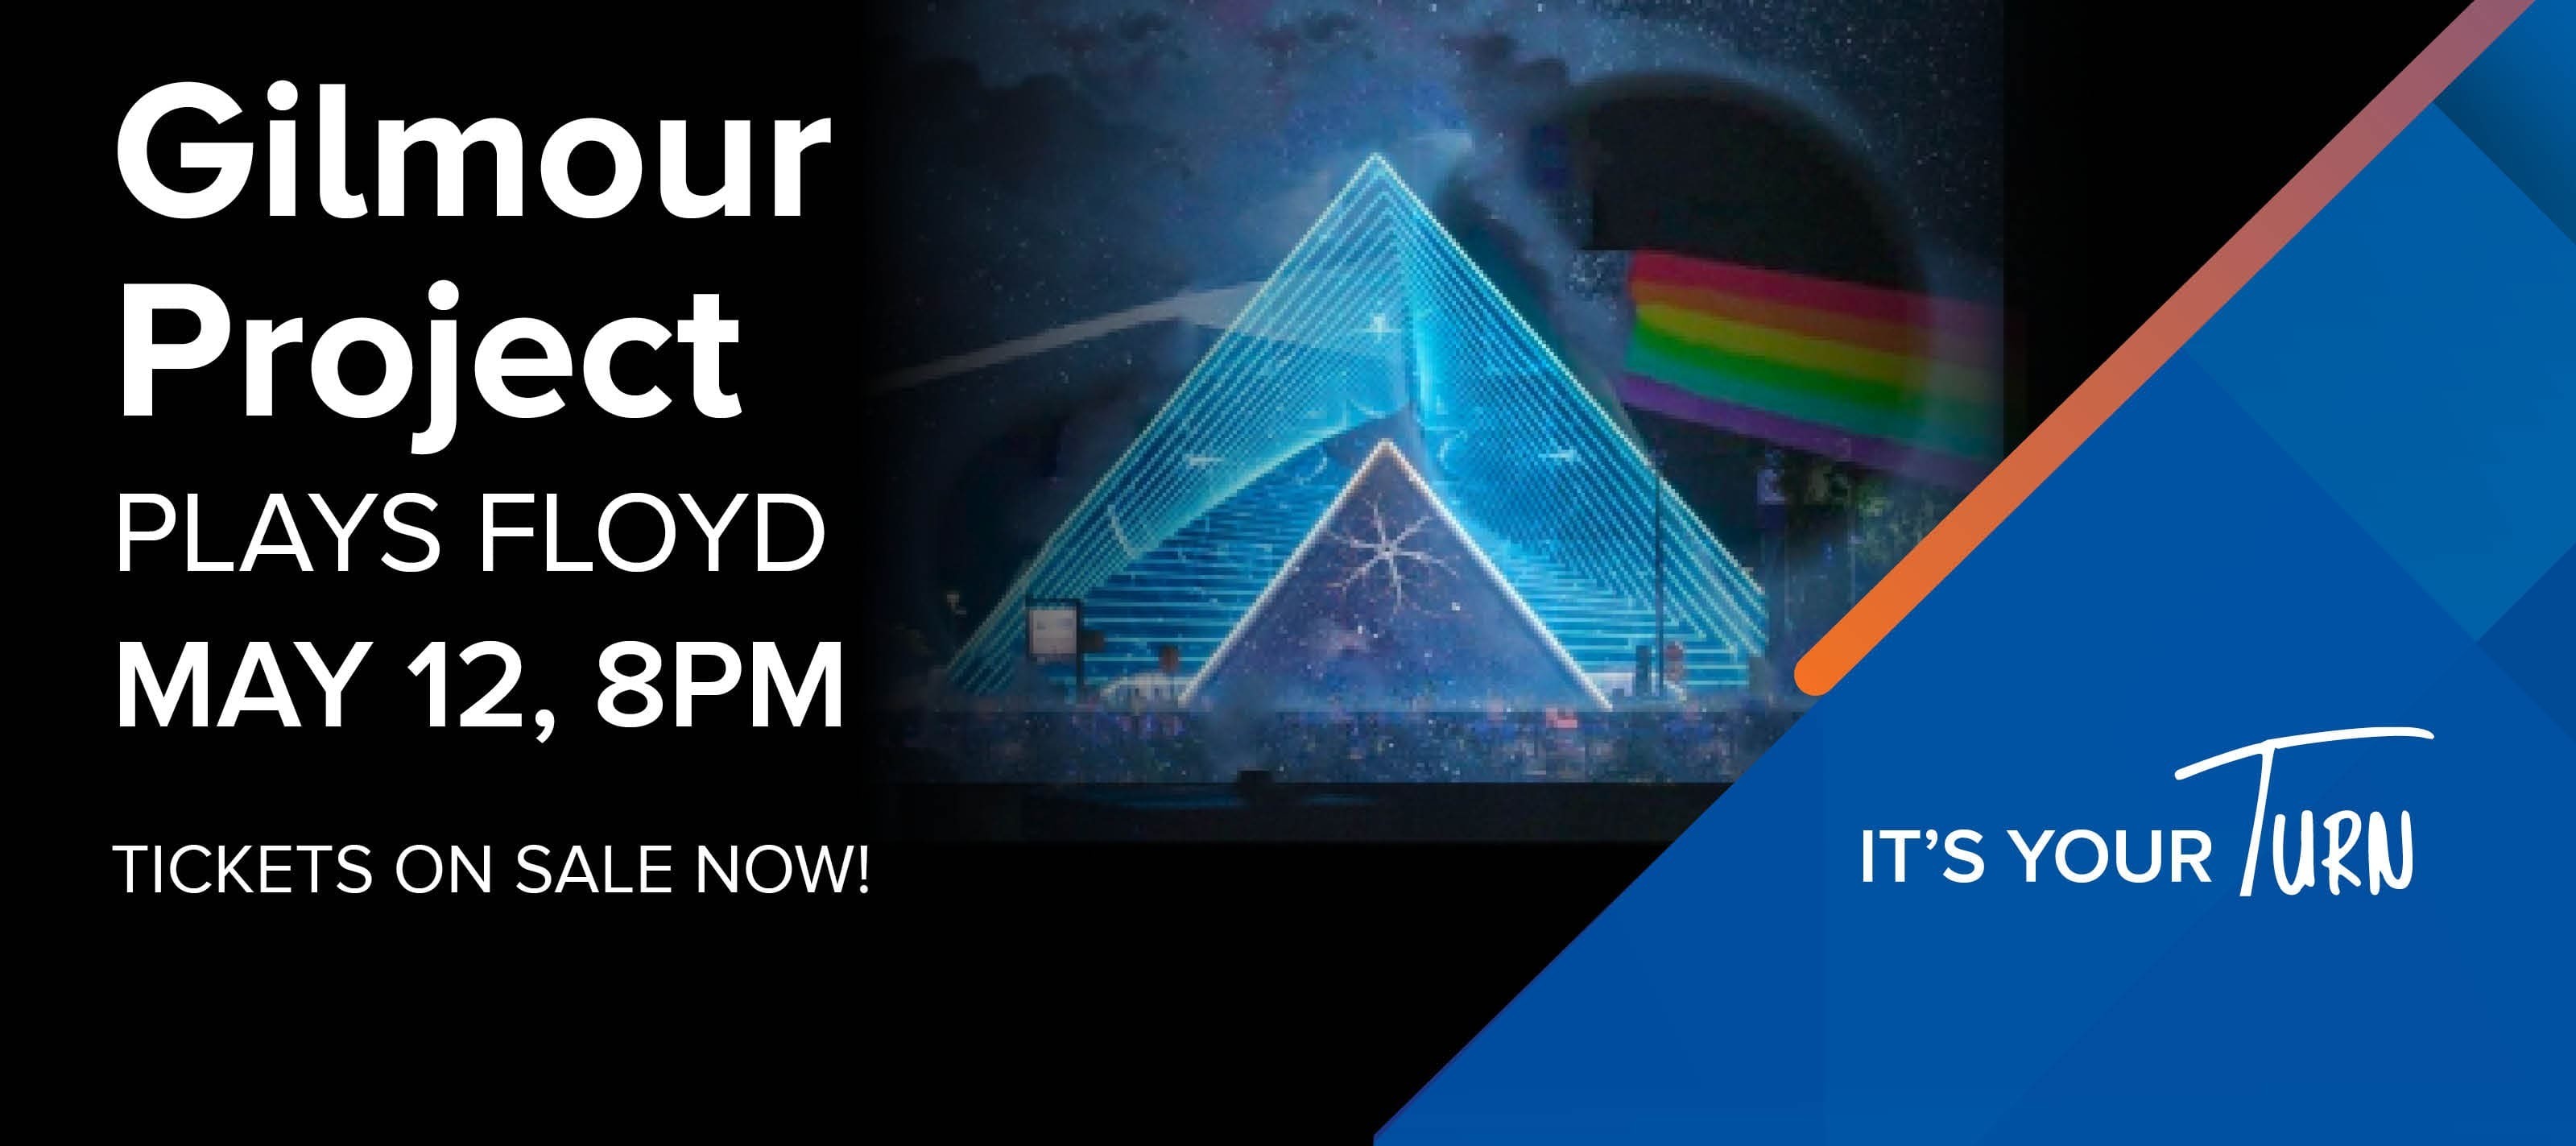 Gilmour Project Plays Floyd May 12 8pm Tickets on Sale Now